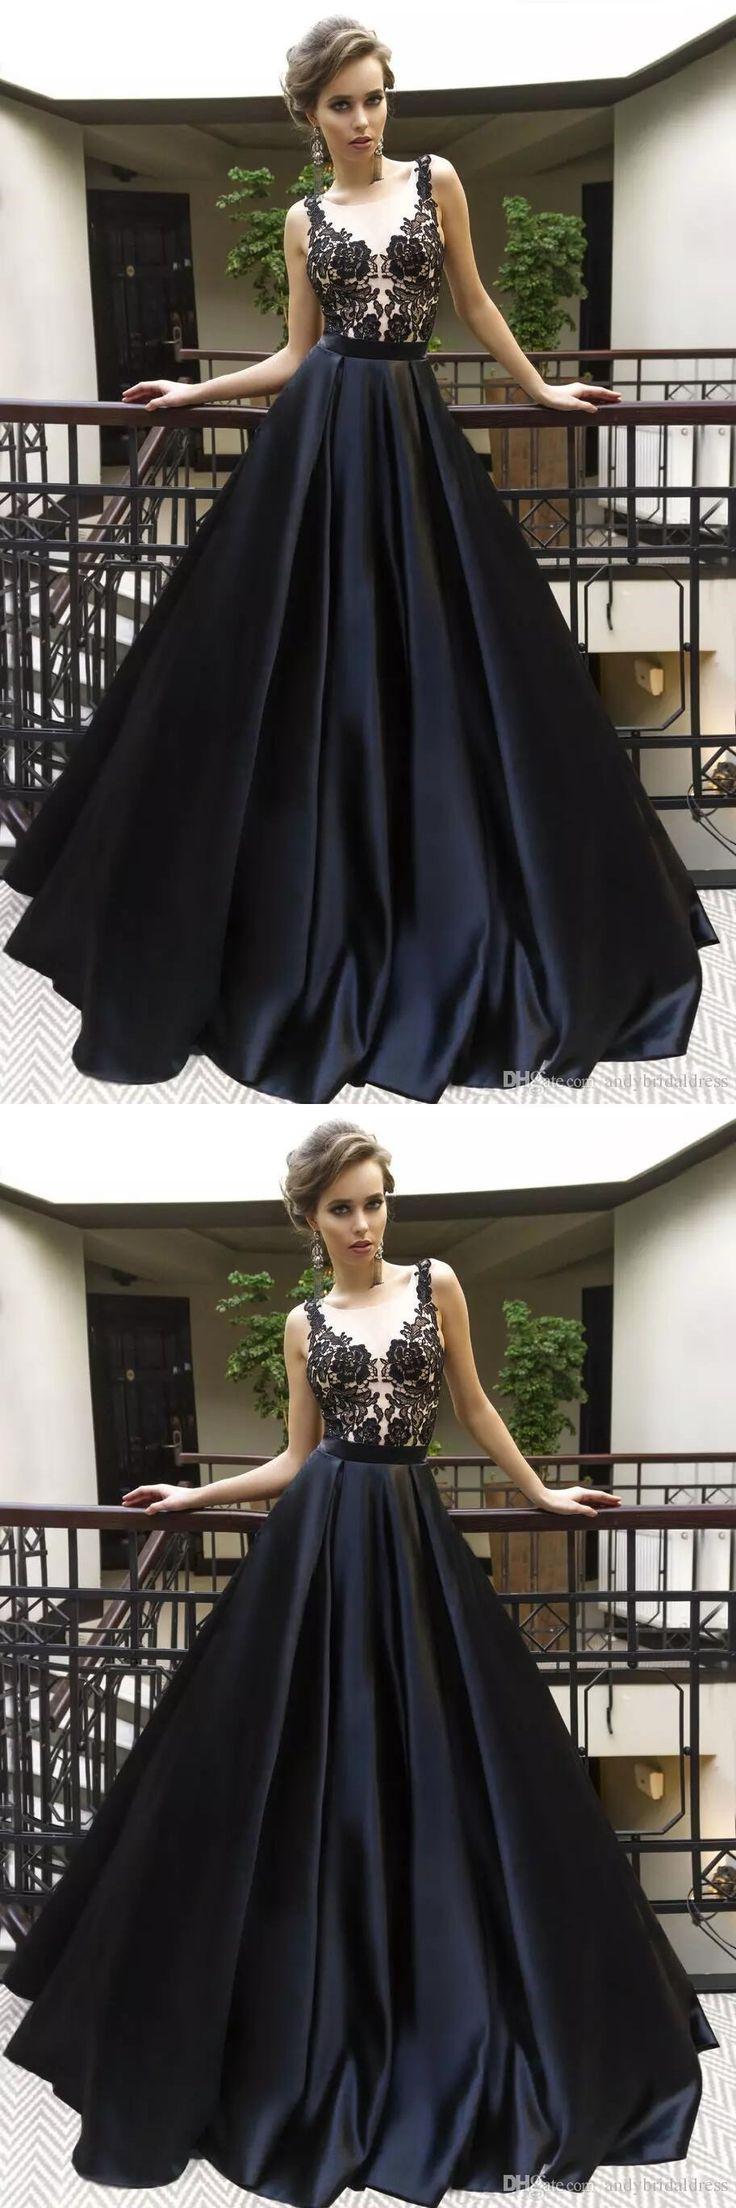 Mariage - Black Prom Dress 2018,Prom Dresses,Evening Gown, Graduation Party Dresses, Prom Dresses For Teens G361 From MeetBeauty